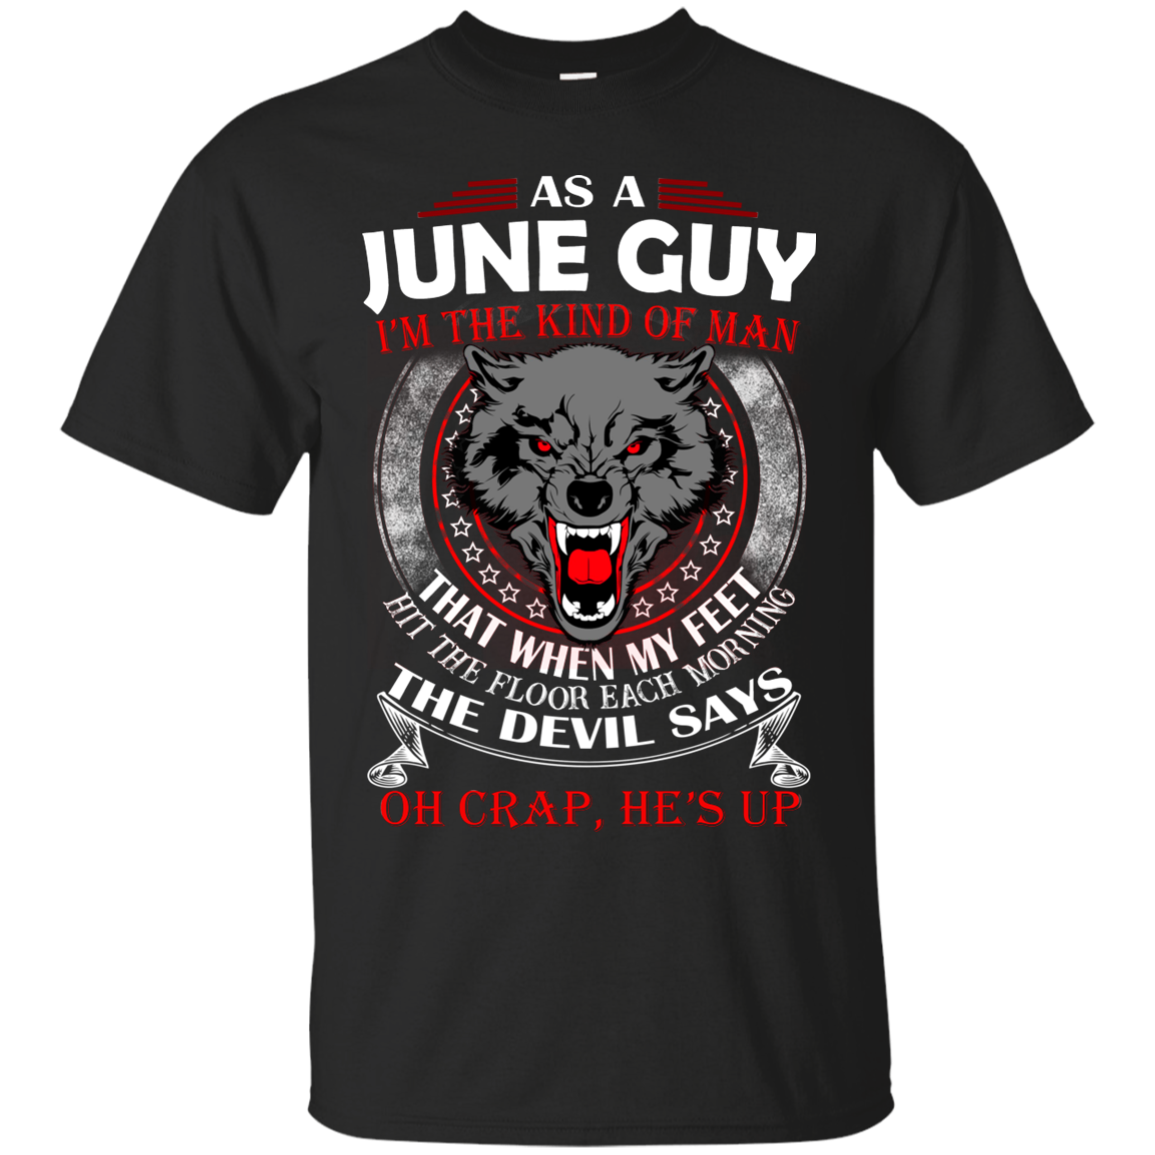 As A June Guy - The Devil Says Oh Crap, He's Up Shirt, Hoodie